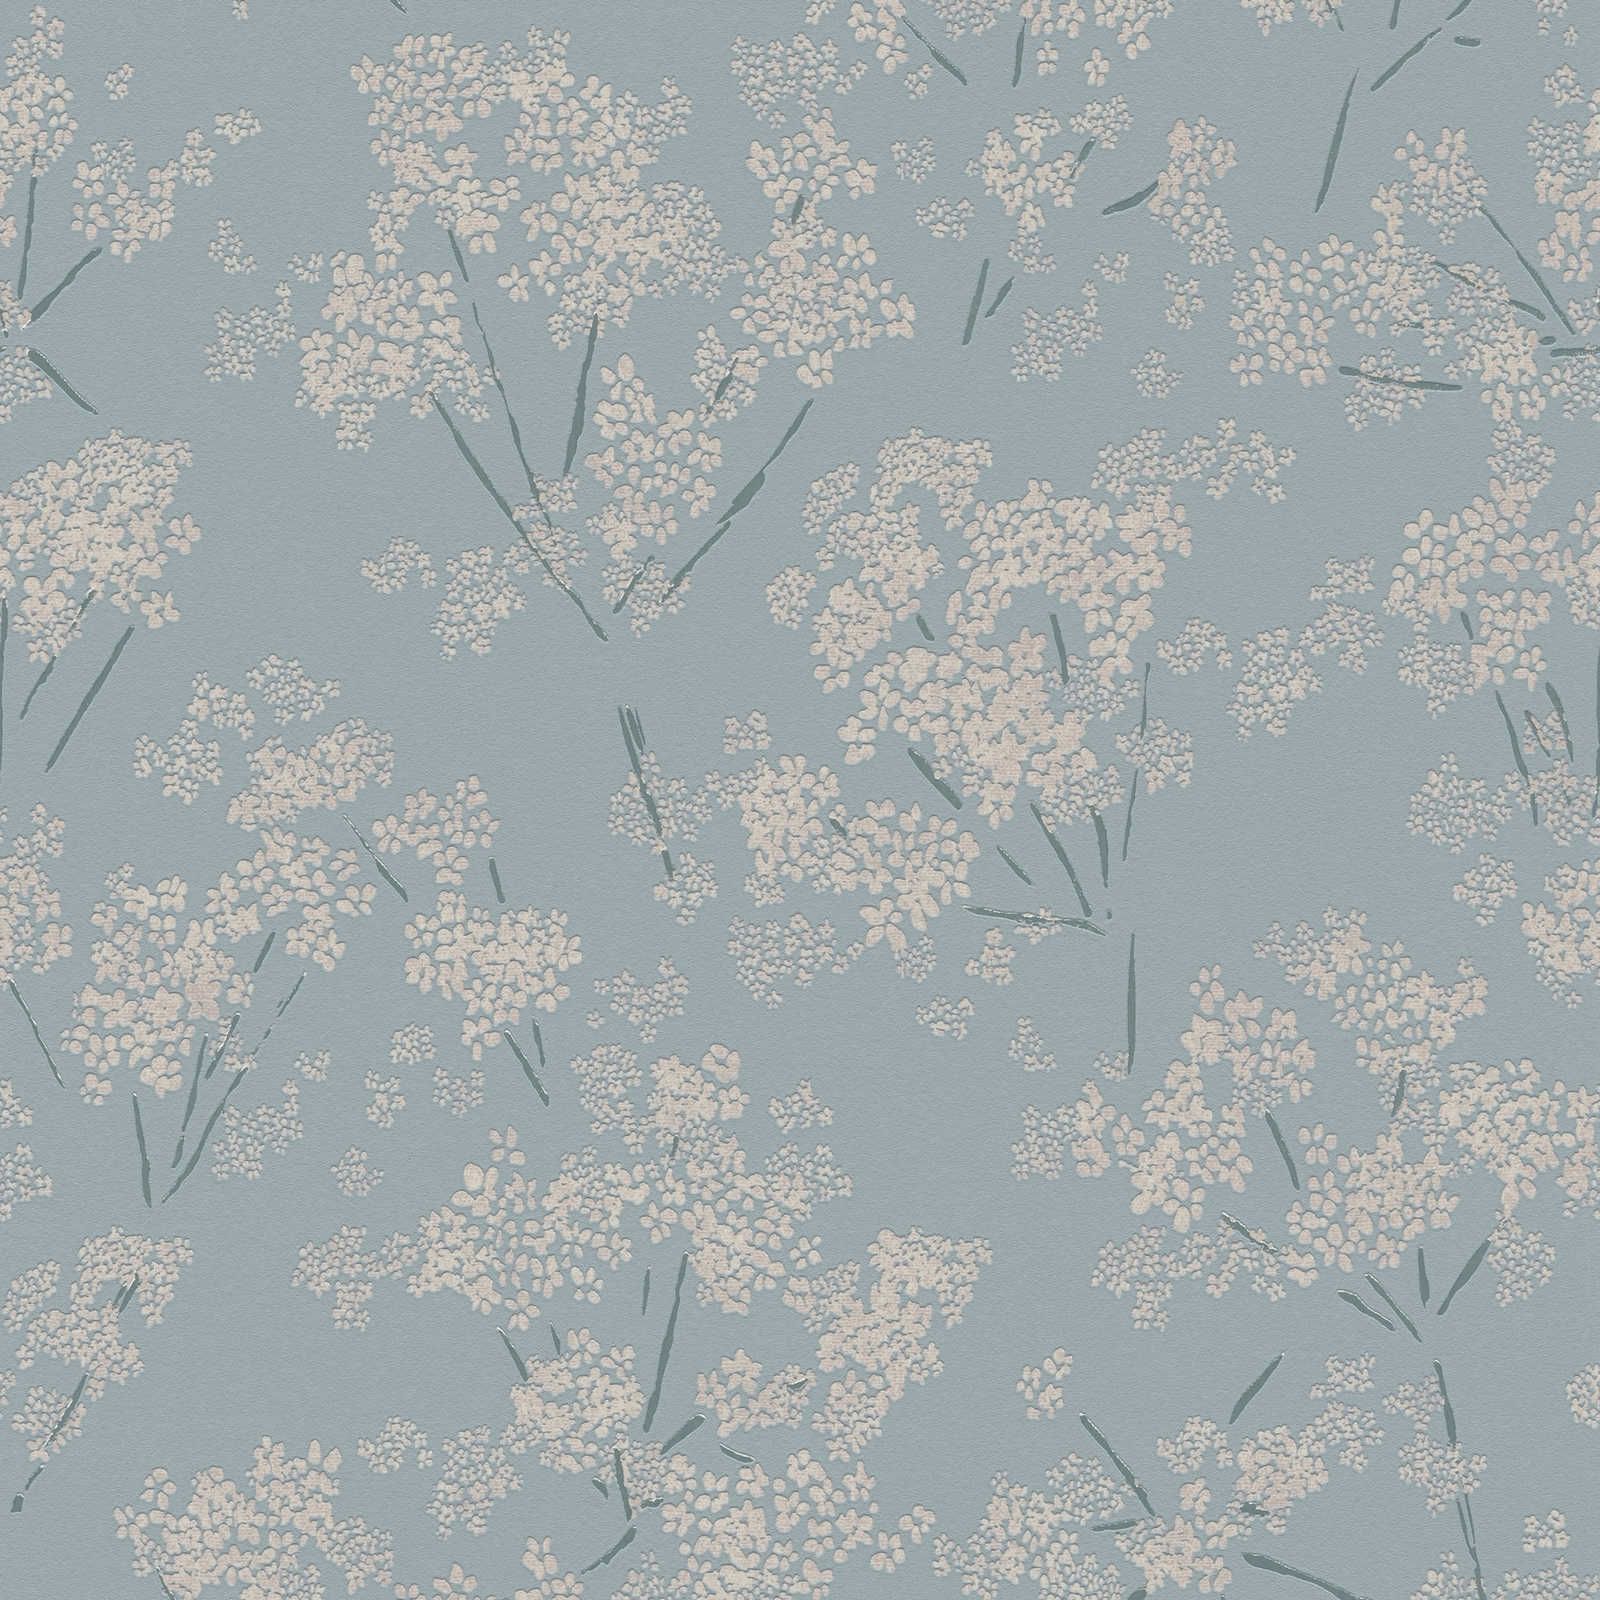 Floral non-woven wallpaper with abstract pattern - blue, beige, turquoise
